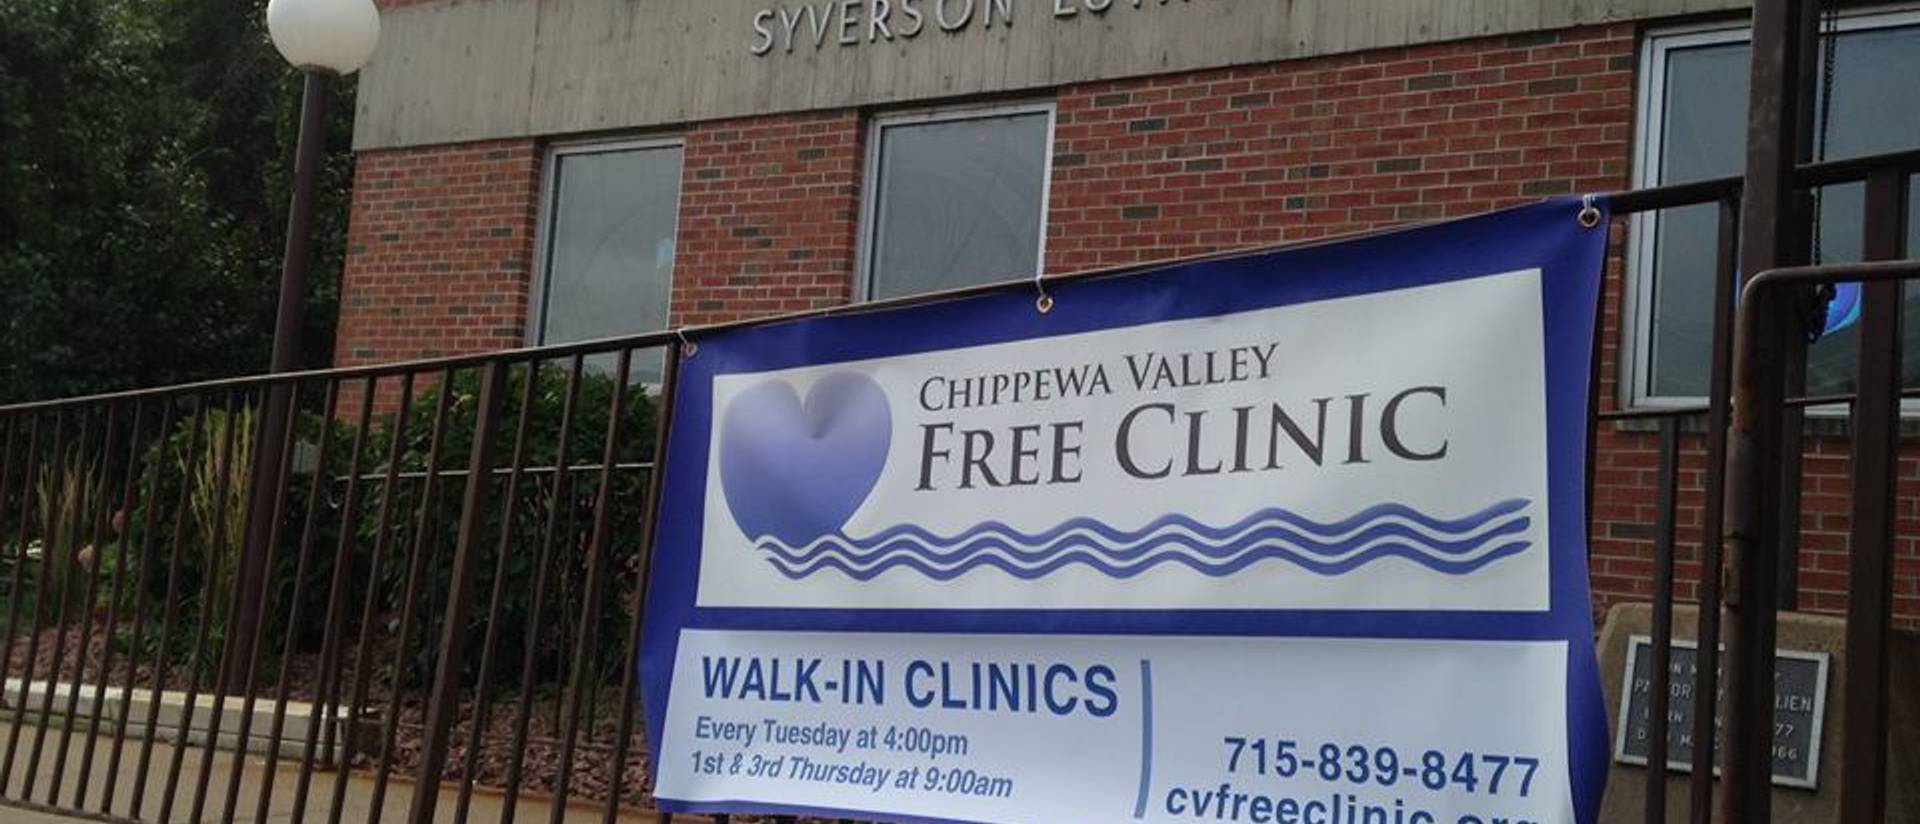 A Chippewa Valley Free Clinic banner hangs from a railing.